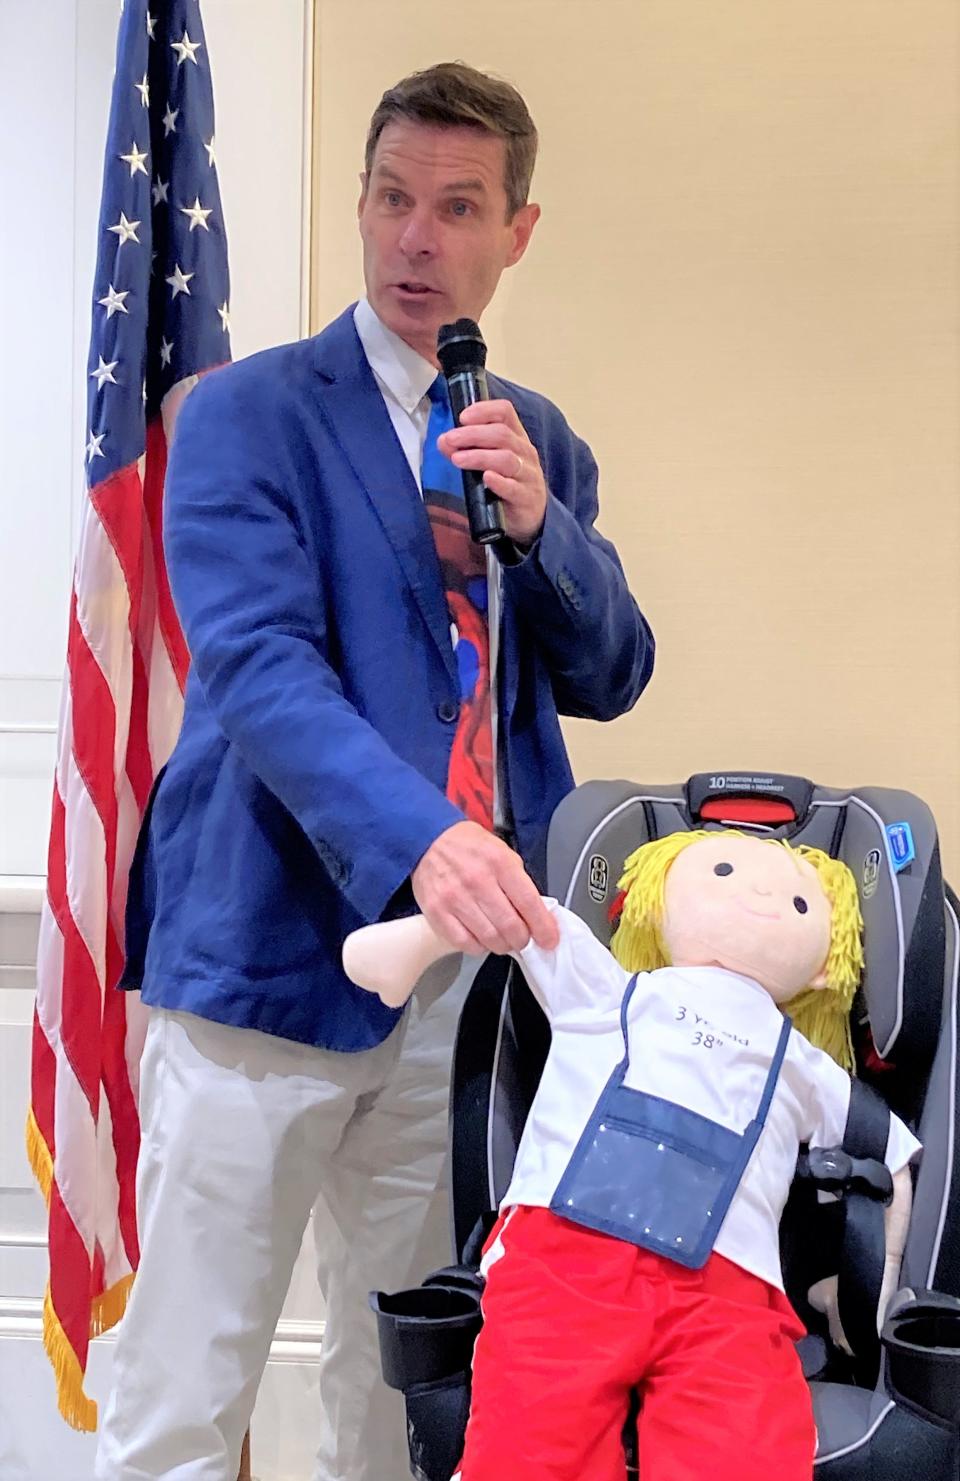 Dr. Gregory Parkinson, a Cape Cod pediatrician, demonstrates on the doll Molly, 3, what happens in a car crash during a legislative briefing Wednesday, urging lawmakers to pass the update to the child restraint laws and save little lives.